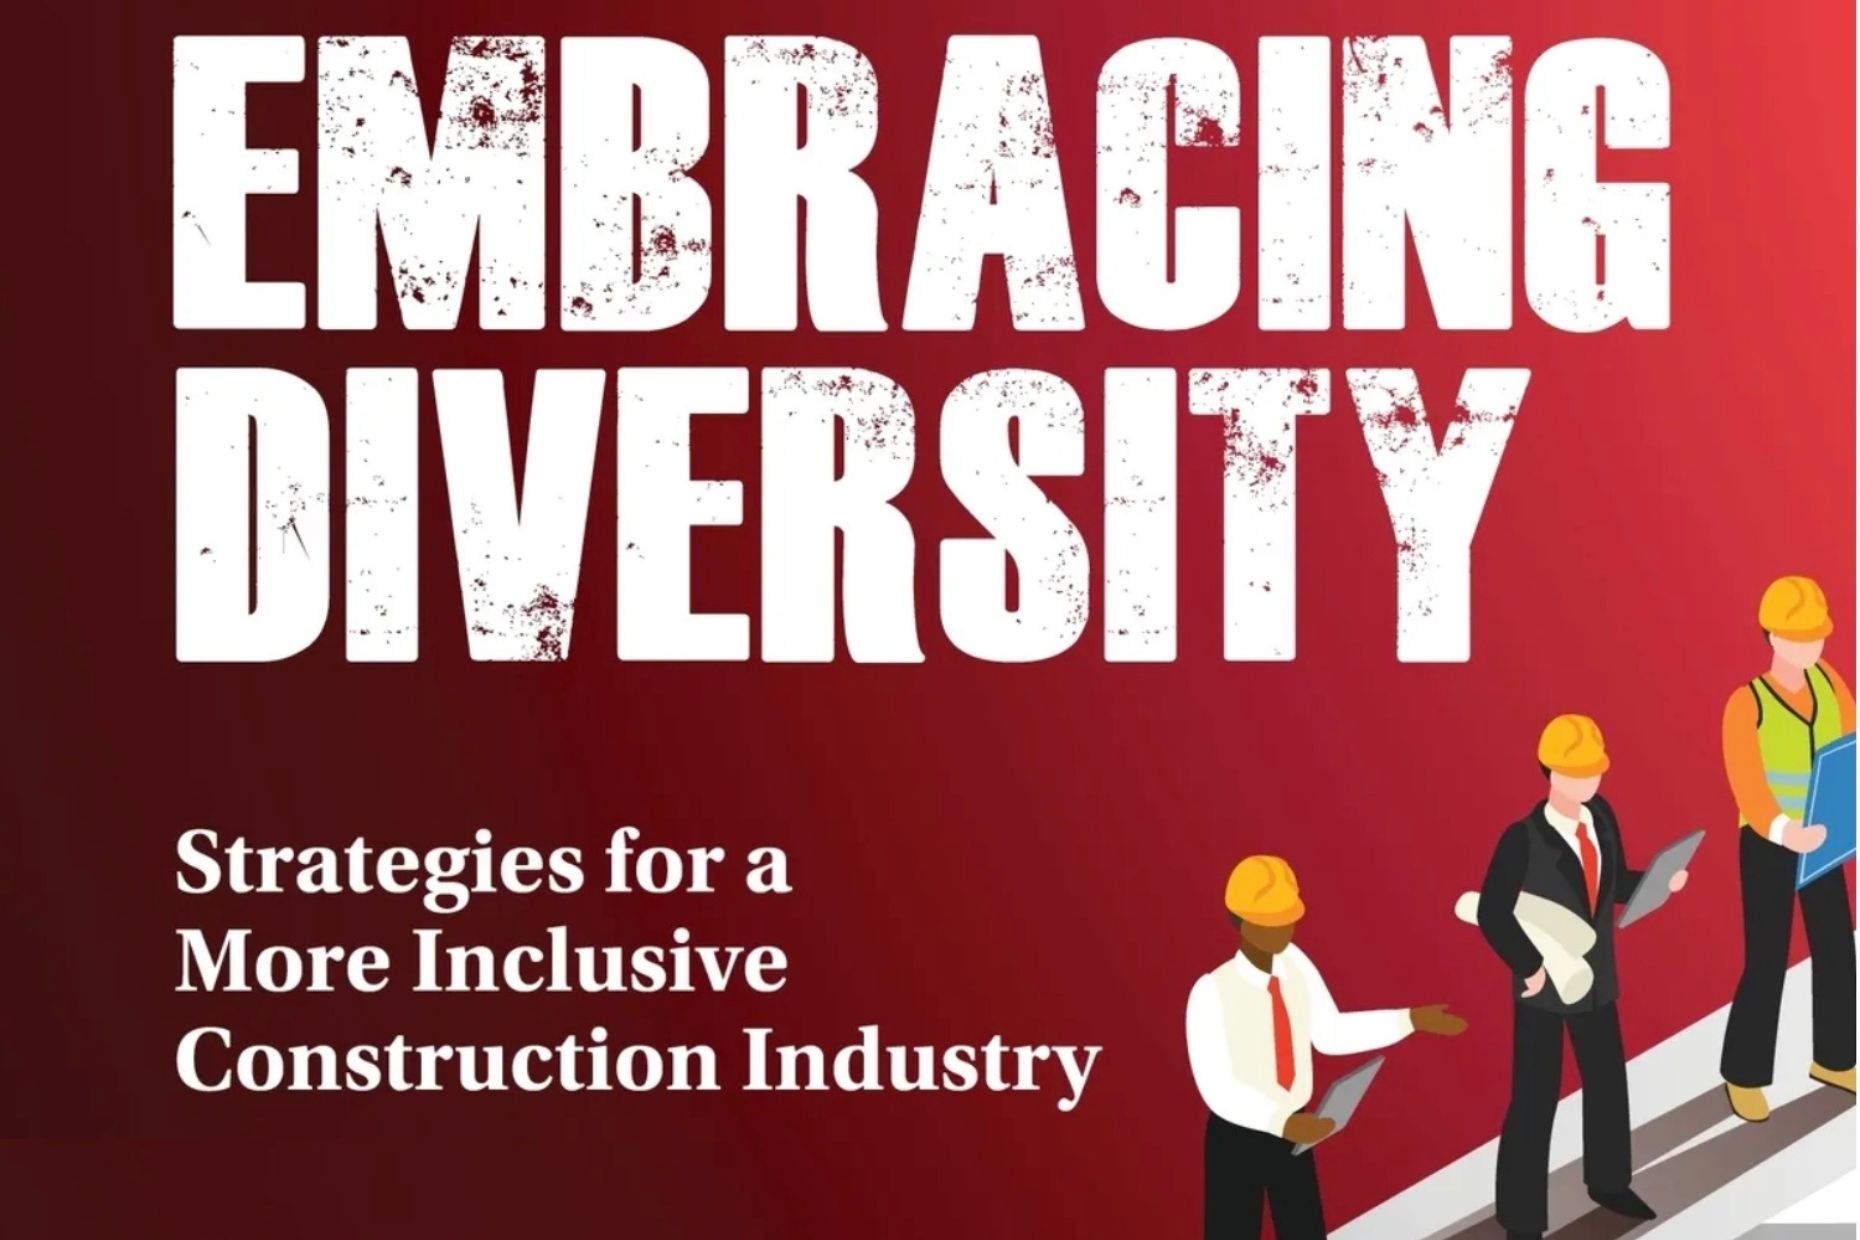 Embracing diversity in the construction industry